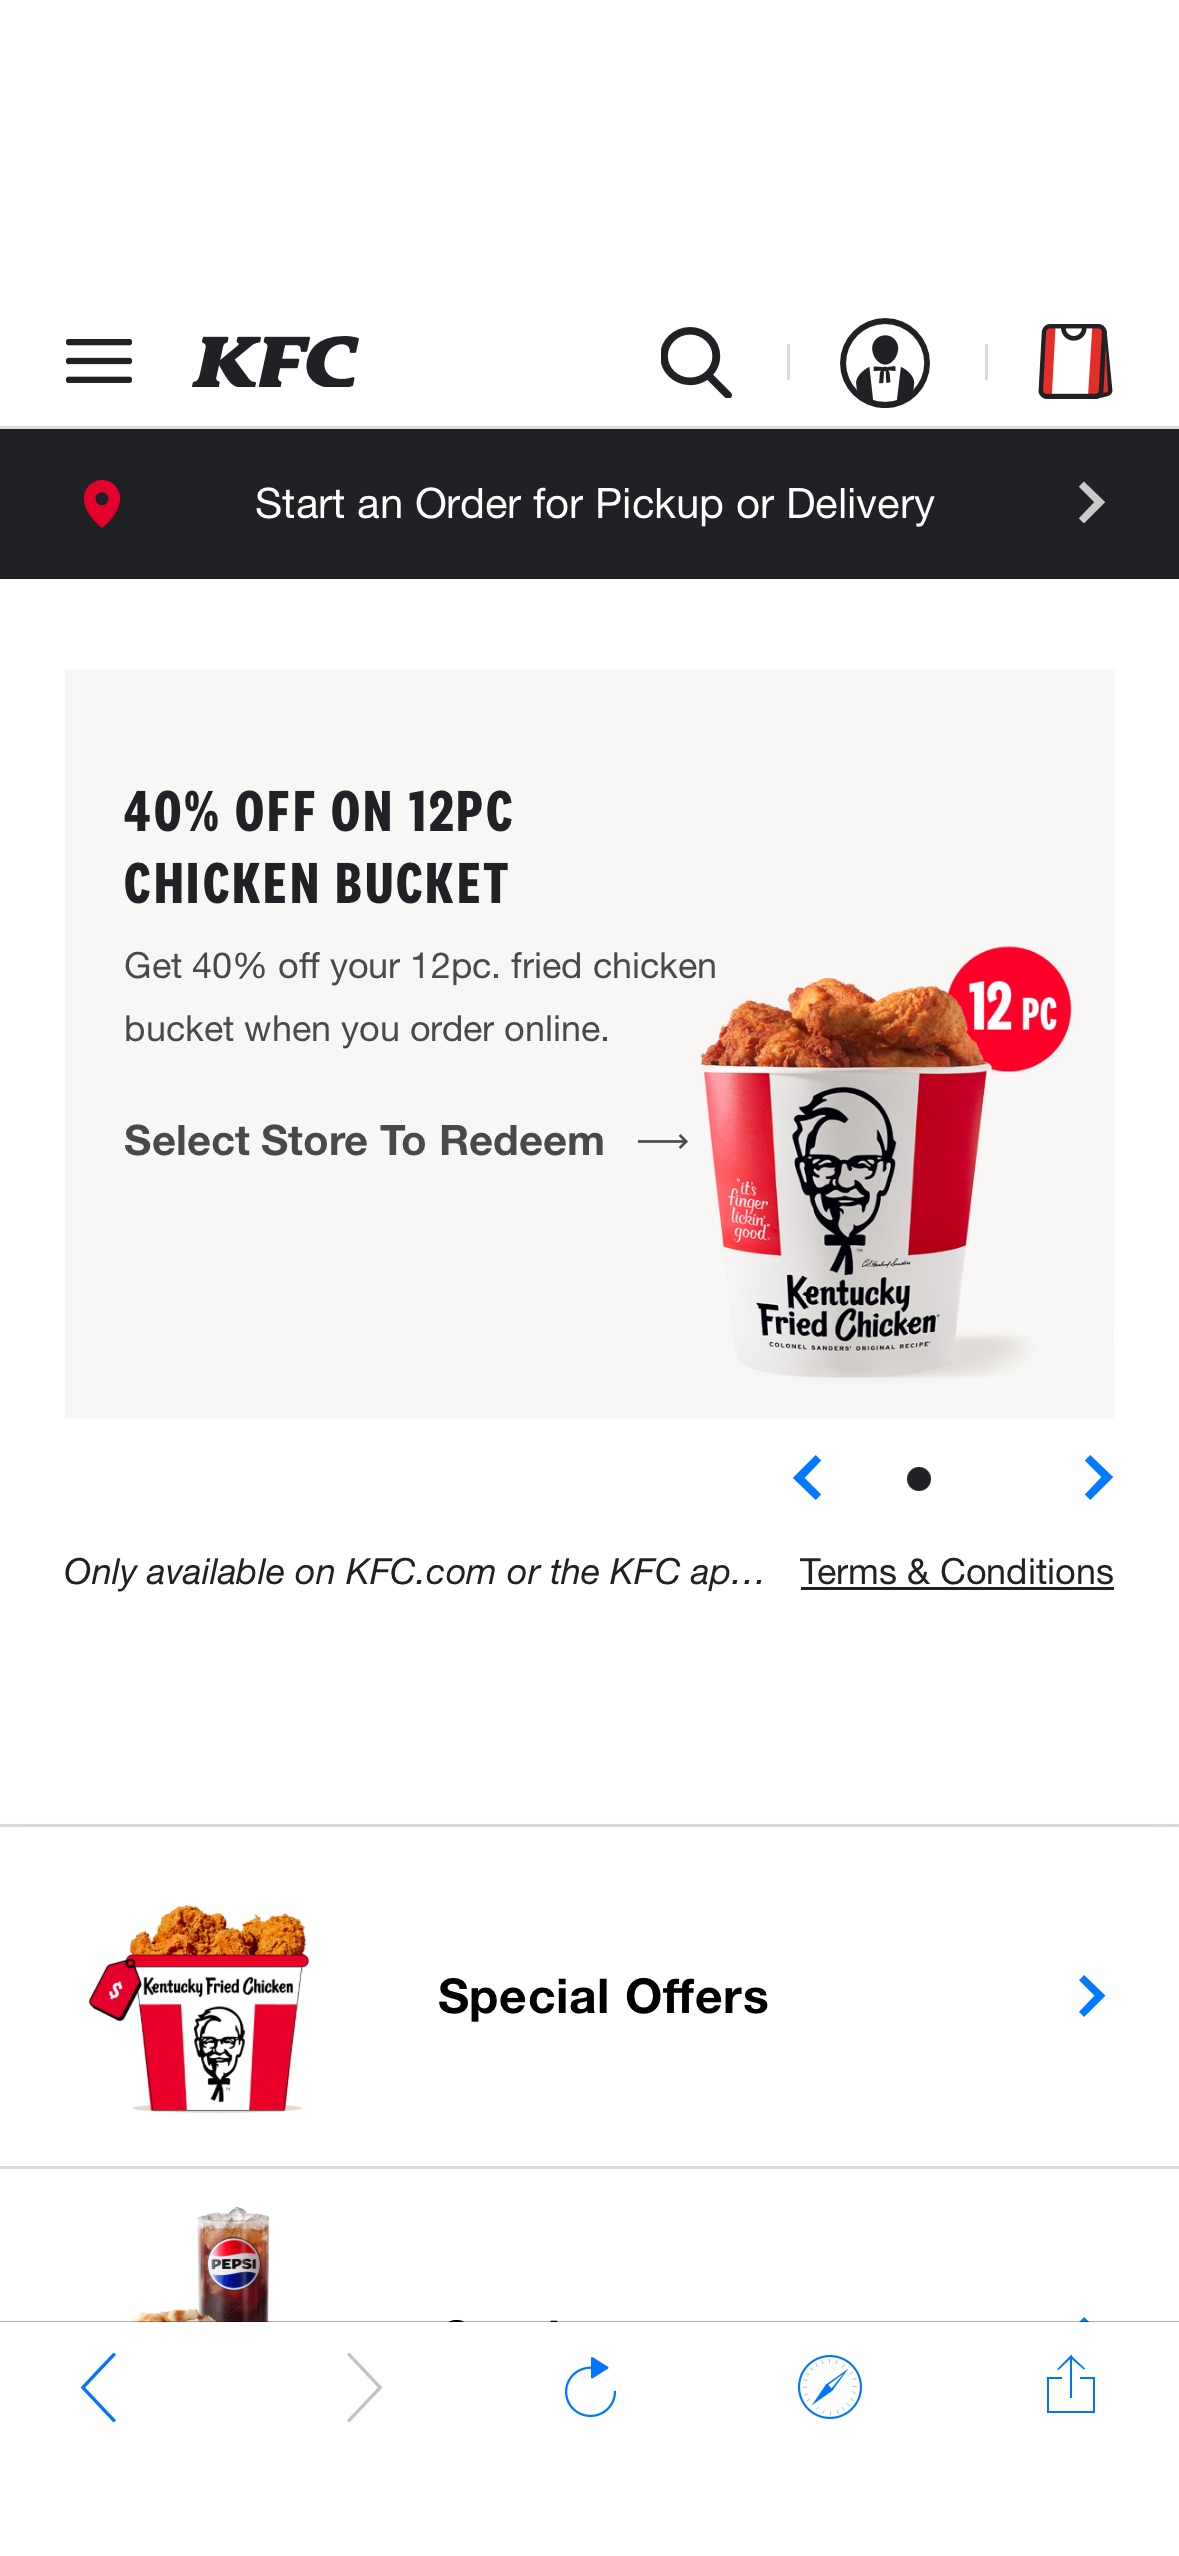 KFC Get 40% Off A 12 PC. Chicken Bucket! with a mix of drumsticks, thighs, breasts, and wings in Original Recipe or Extra Crispy. Use the KFC app or website to order, it’s a limited-time deal at selec